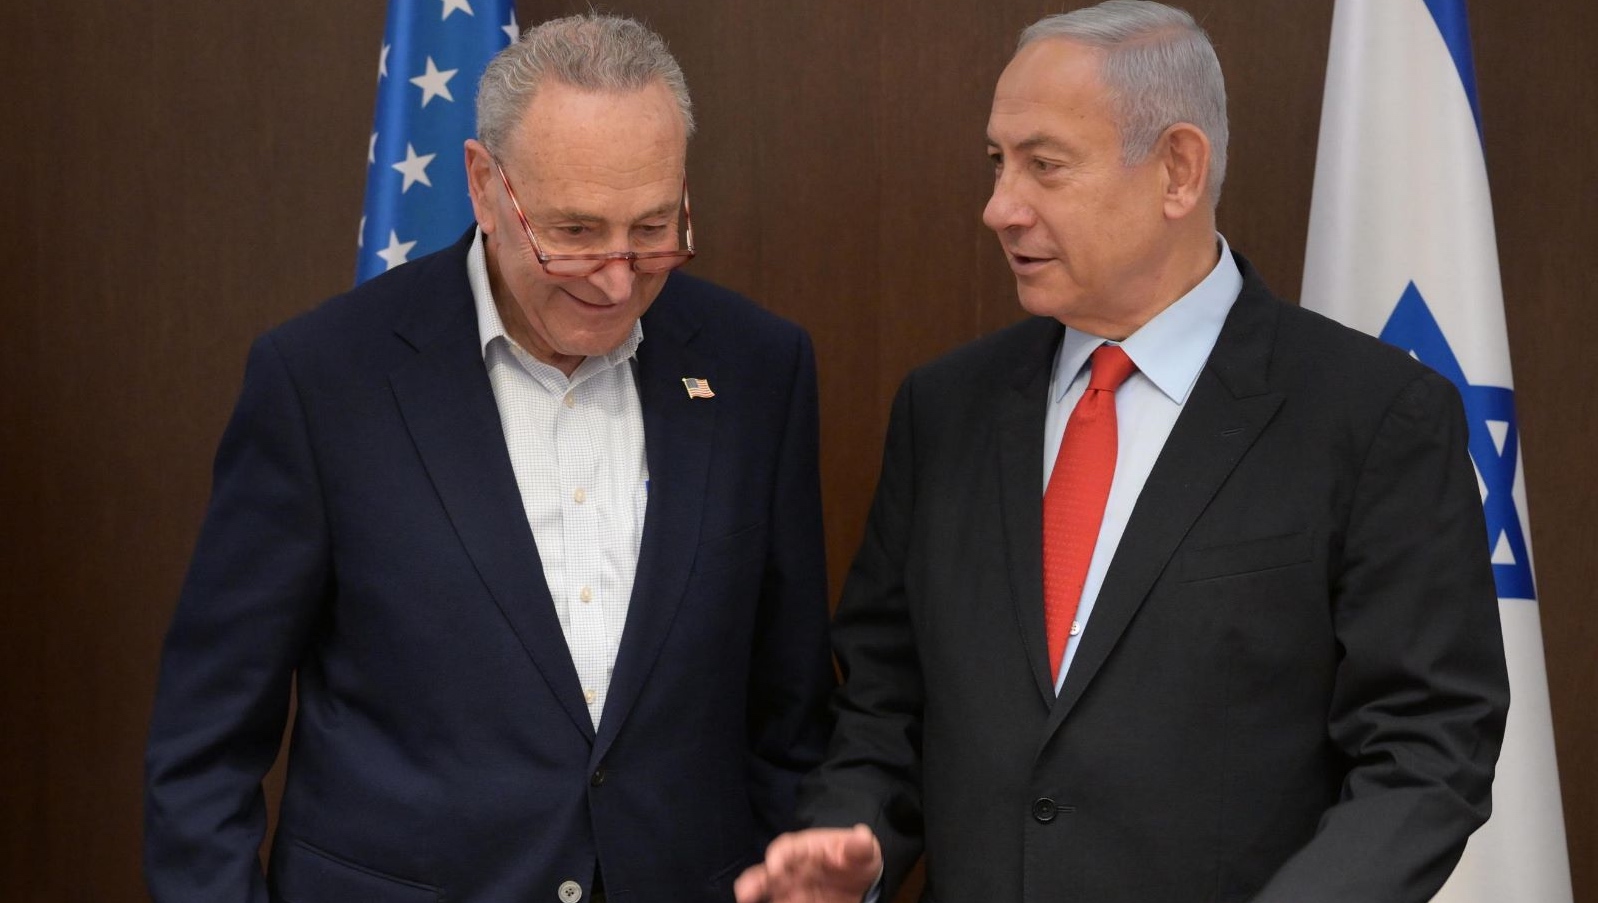 Chuck Schumer called for elections in Israel. What did he hope to achieve?